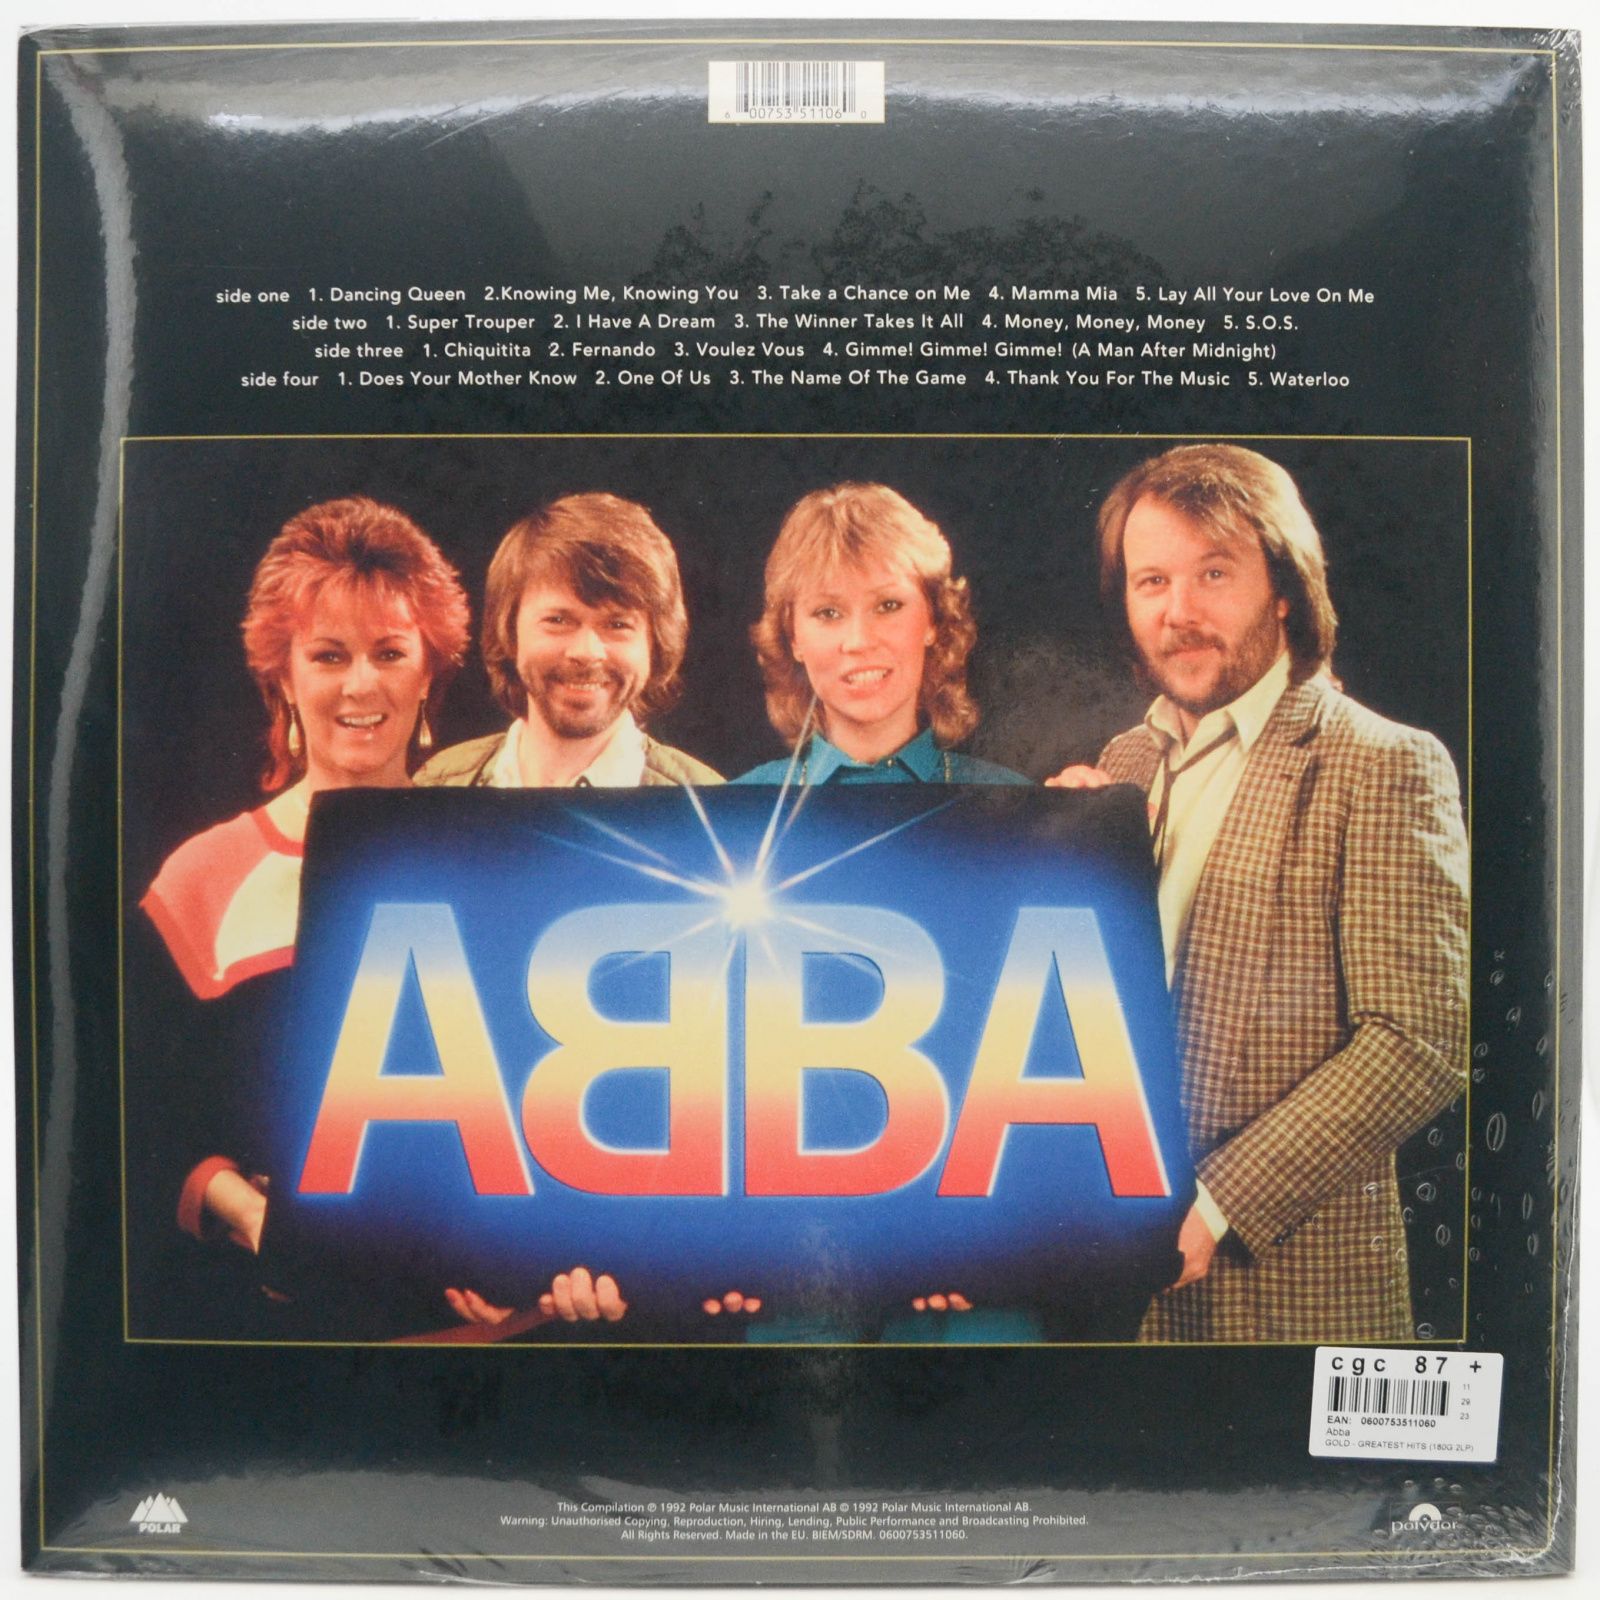 ABBA — Gold (Greatest Hits) (2LP), 1992